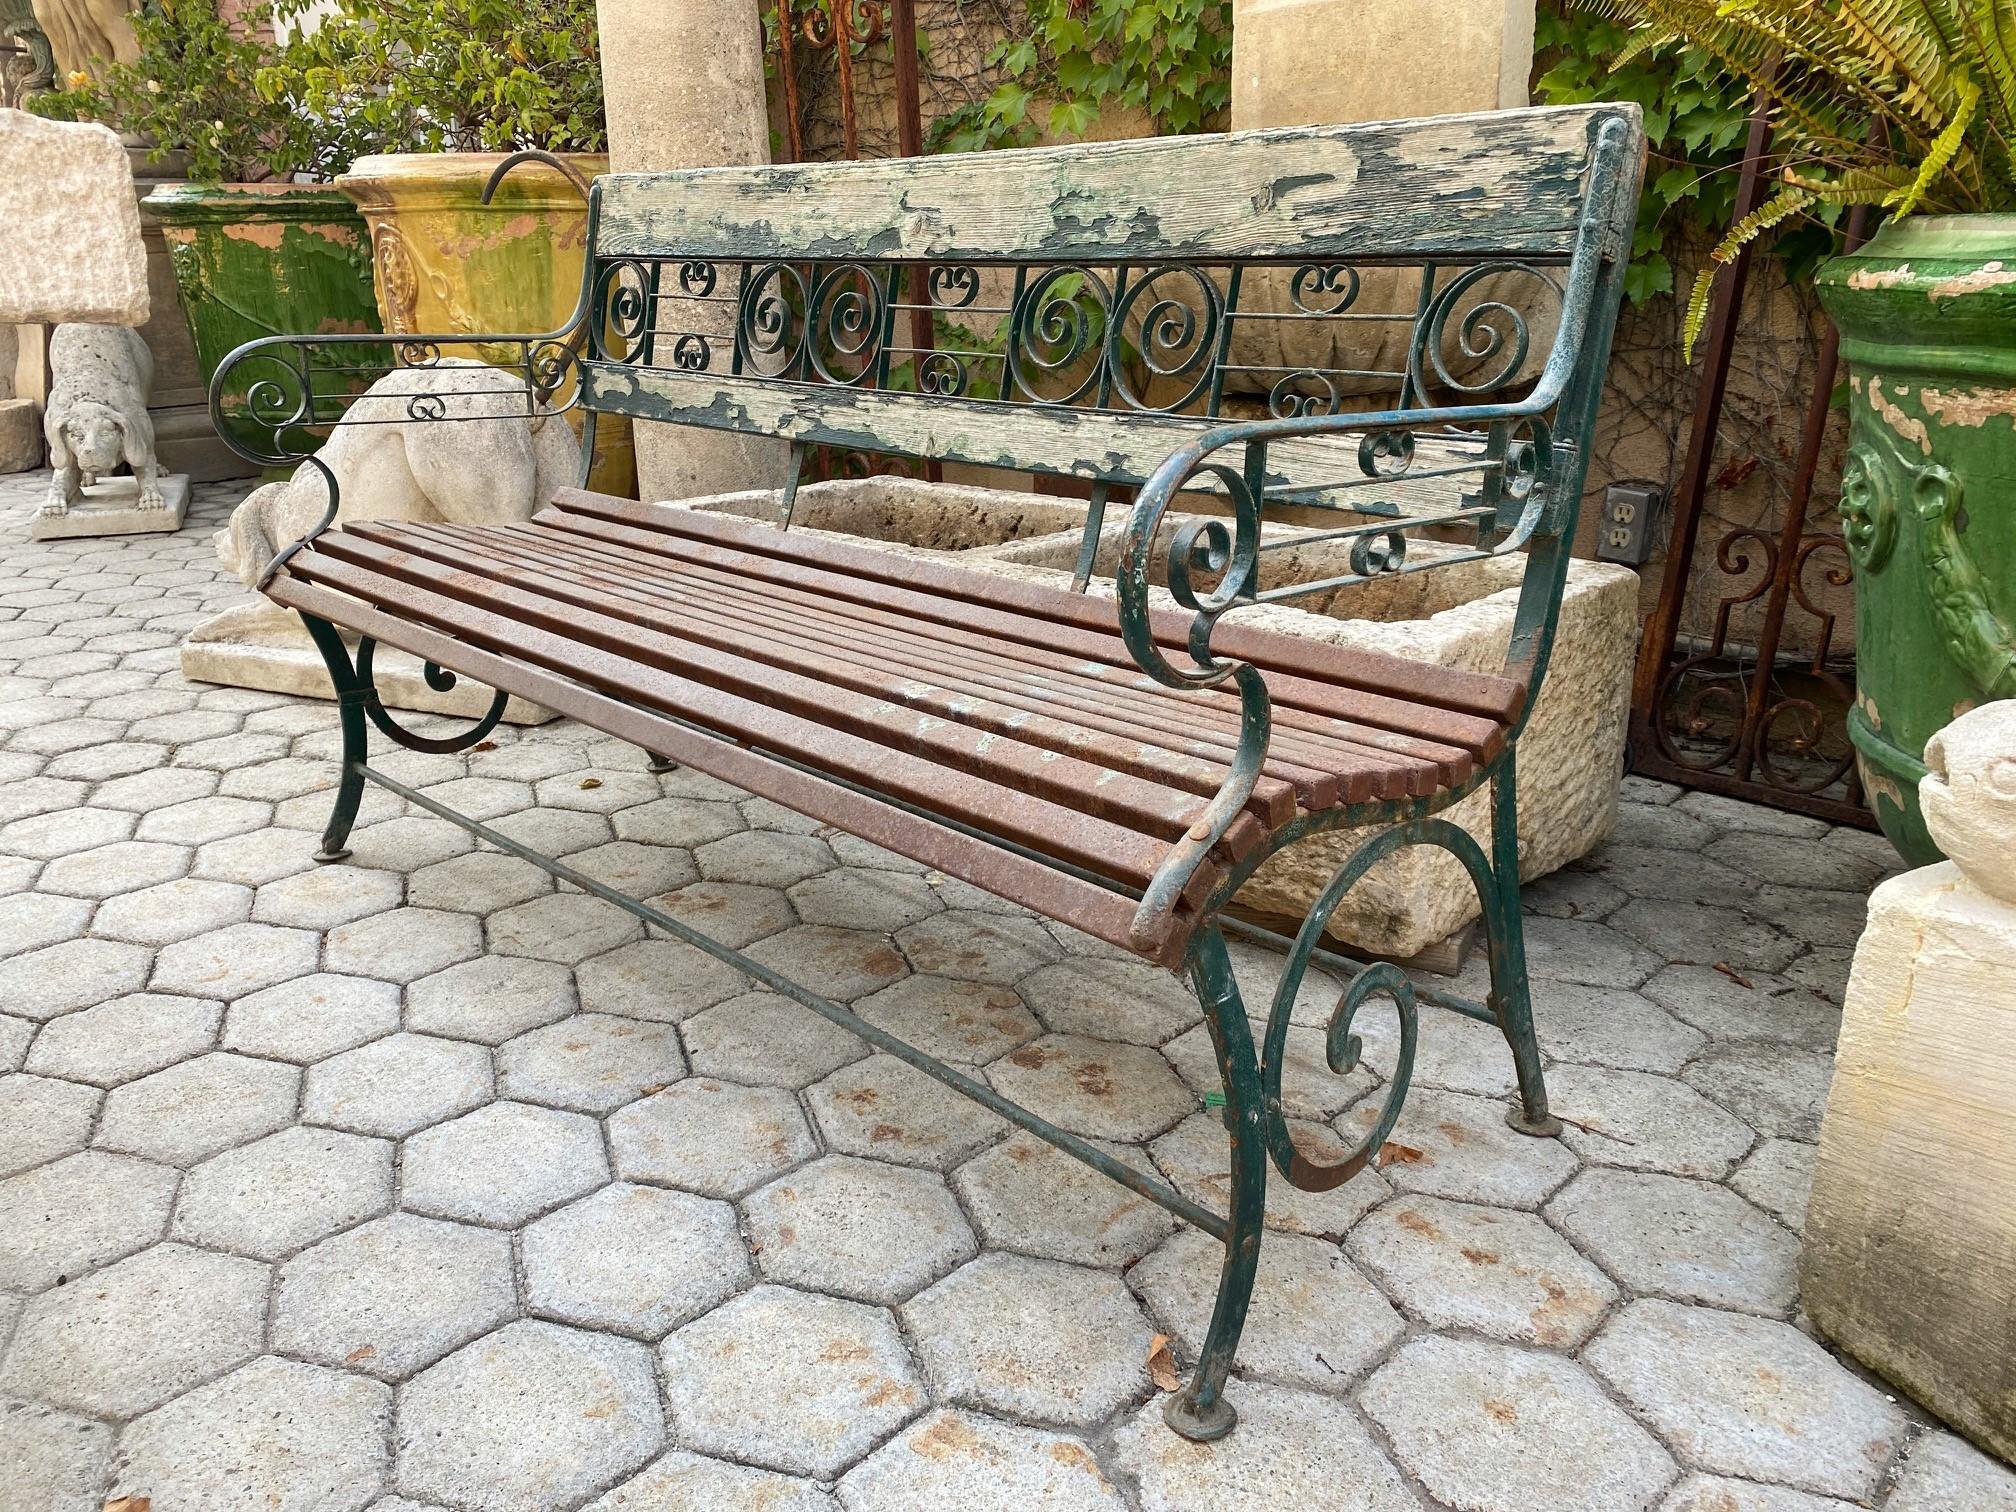 Large 19th century Art Nouveau hand forged metal and wood slats garden bench. This rustic antique beauty is a nice piece indeed a beautiful garden bench simple lines that works in an interior as a seating or decorative architectural focal point